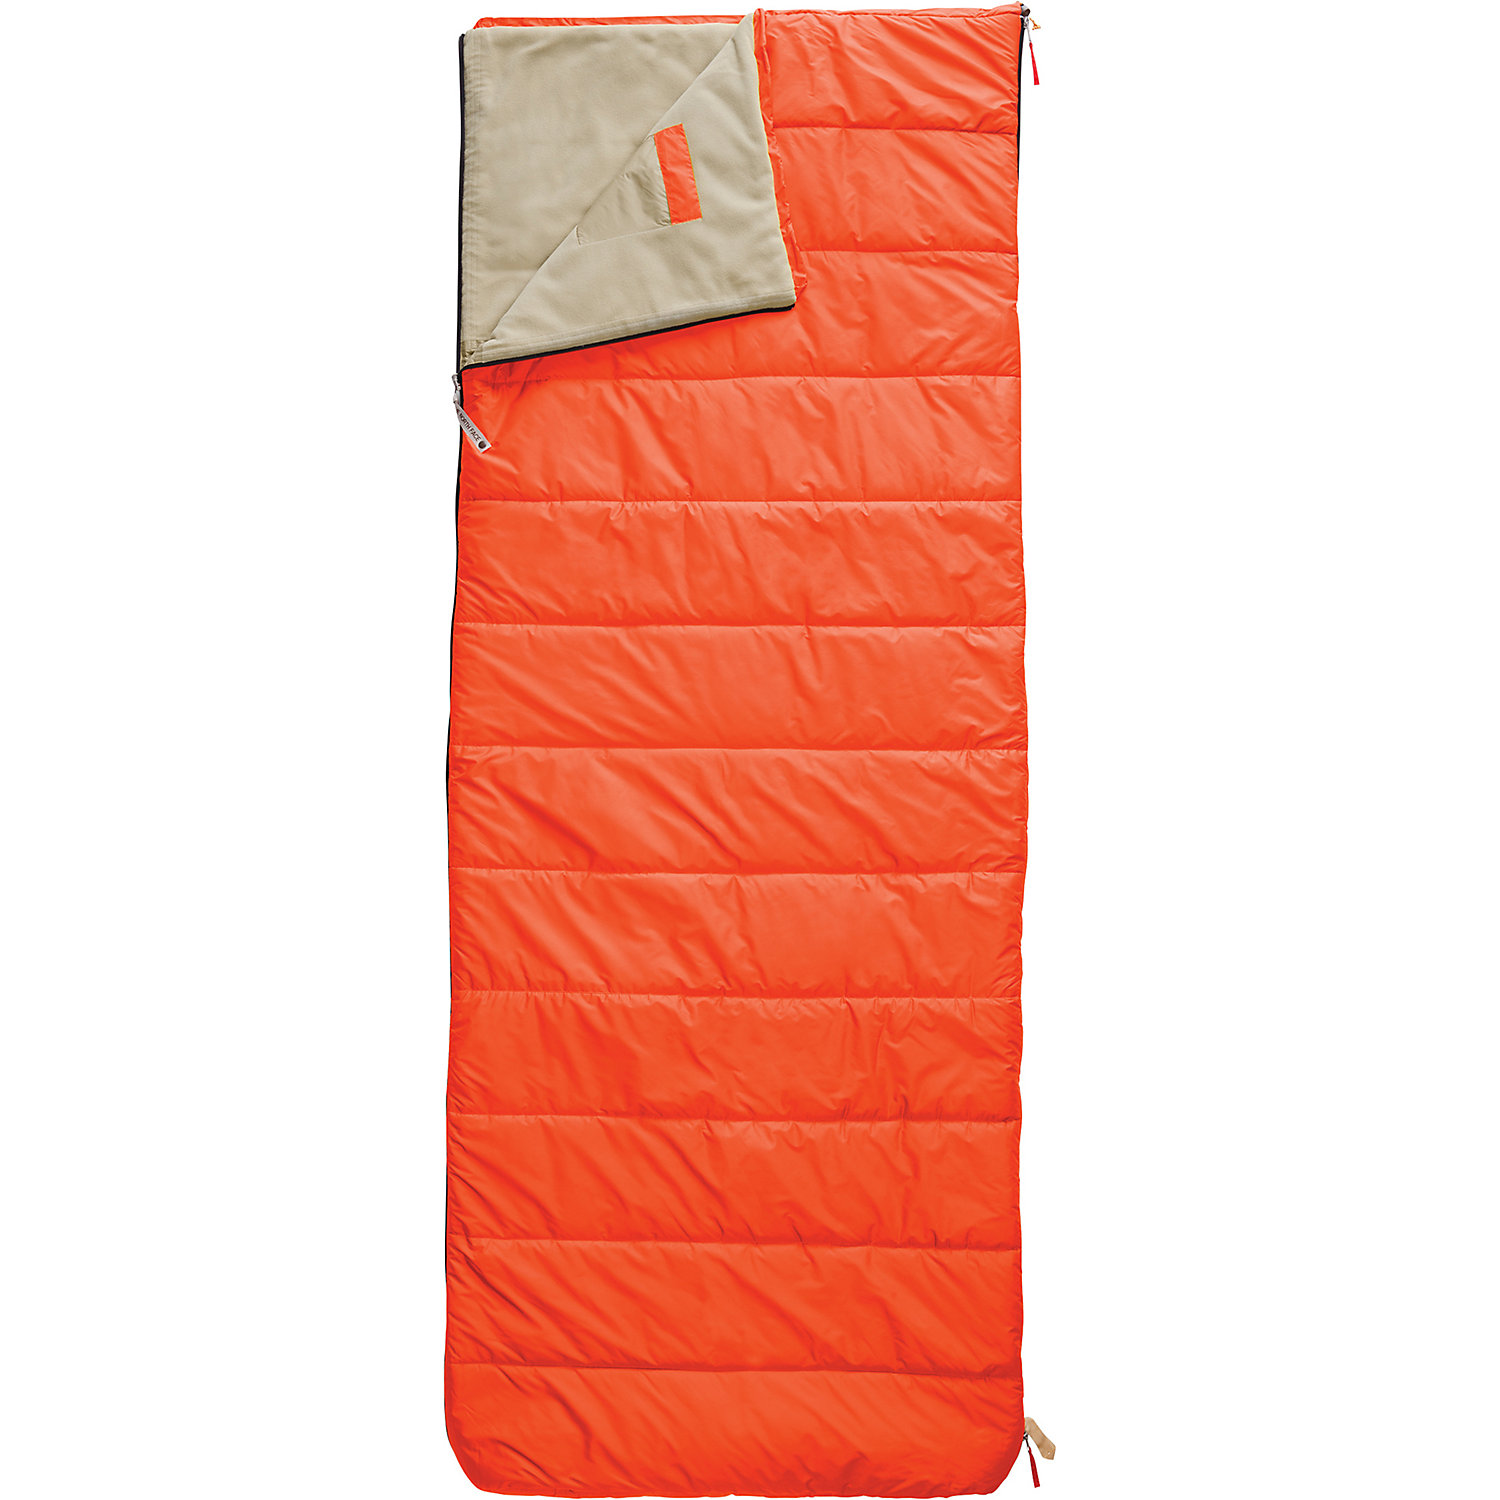 The North Face Eco Trail Bed 35 Sleeping Bag